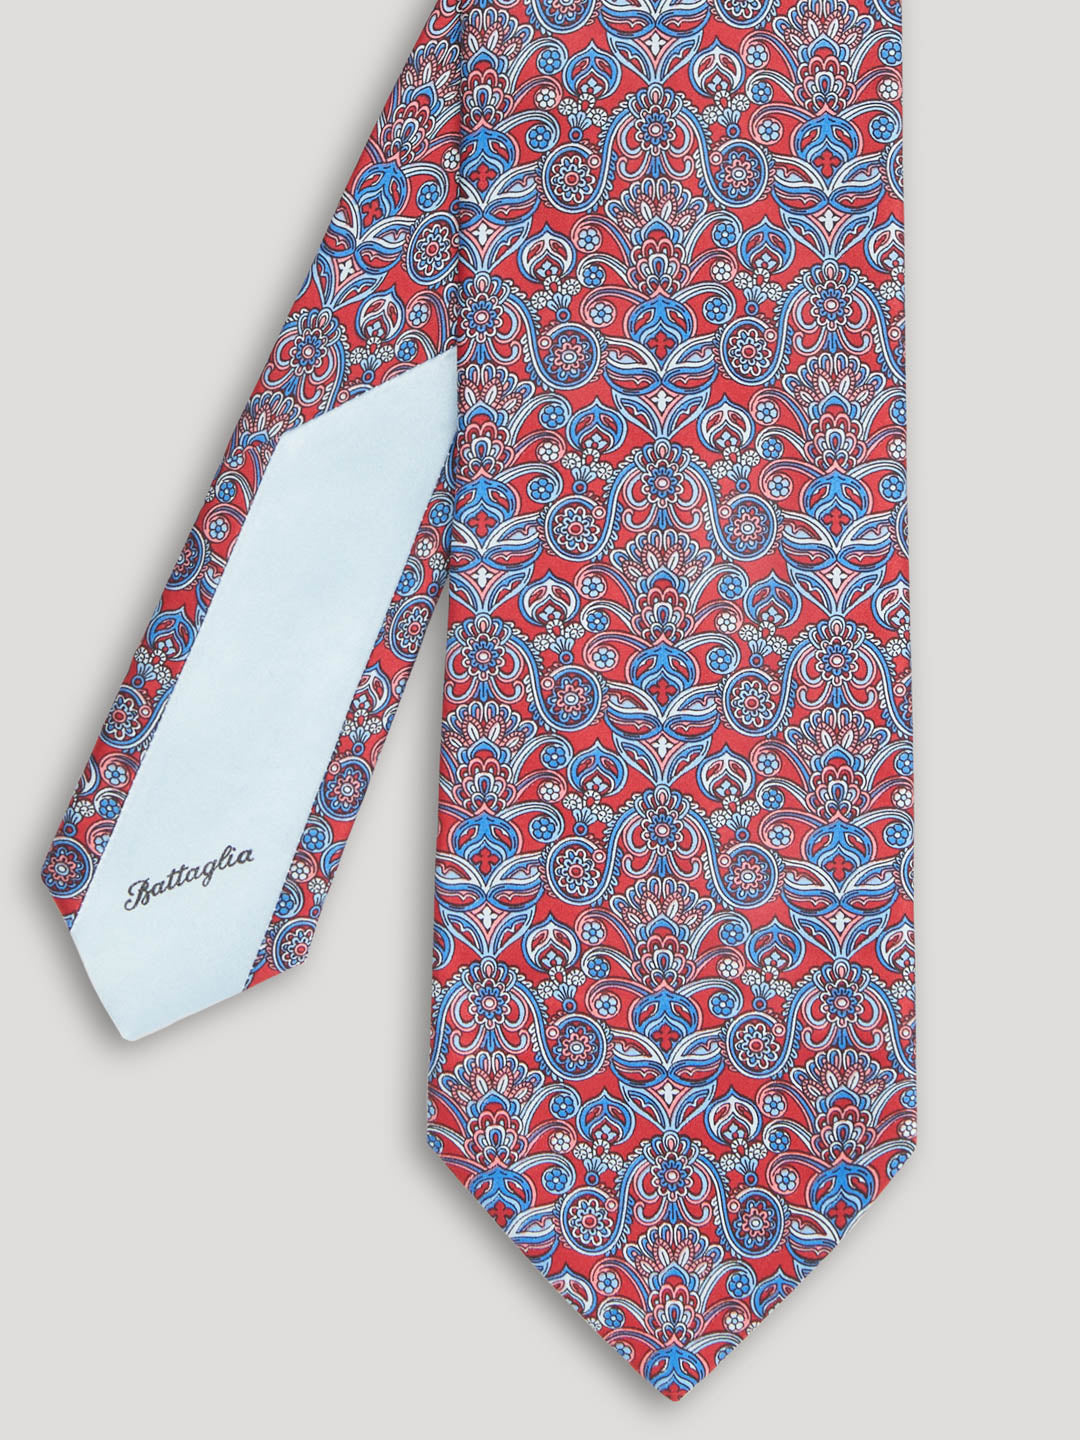 Blue and red floral design tie.